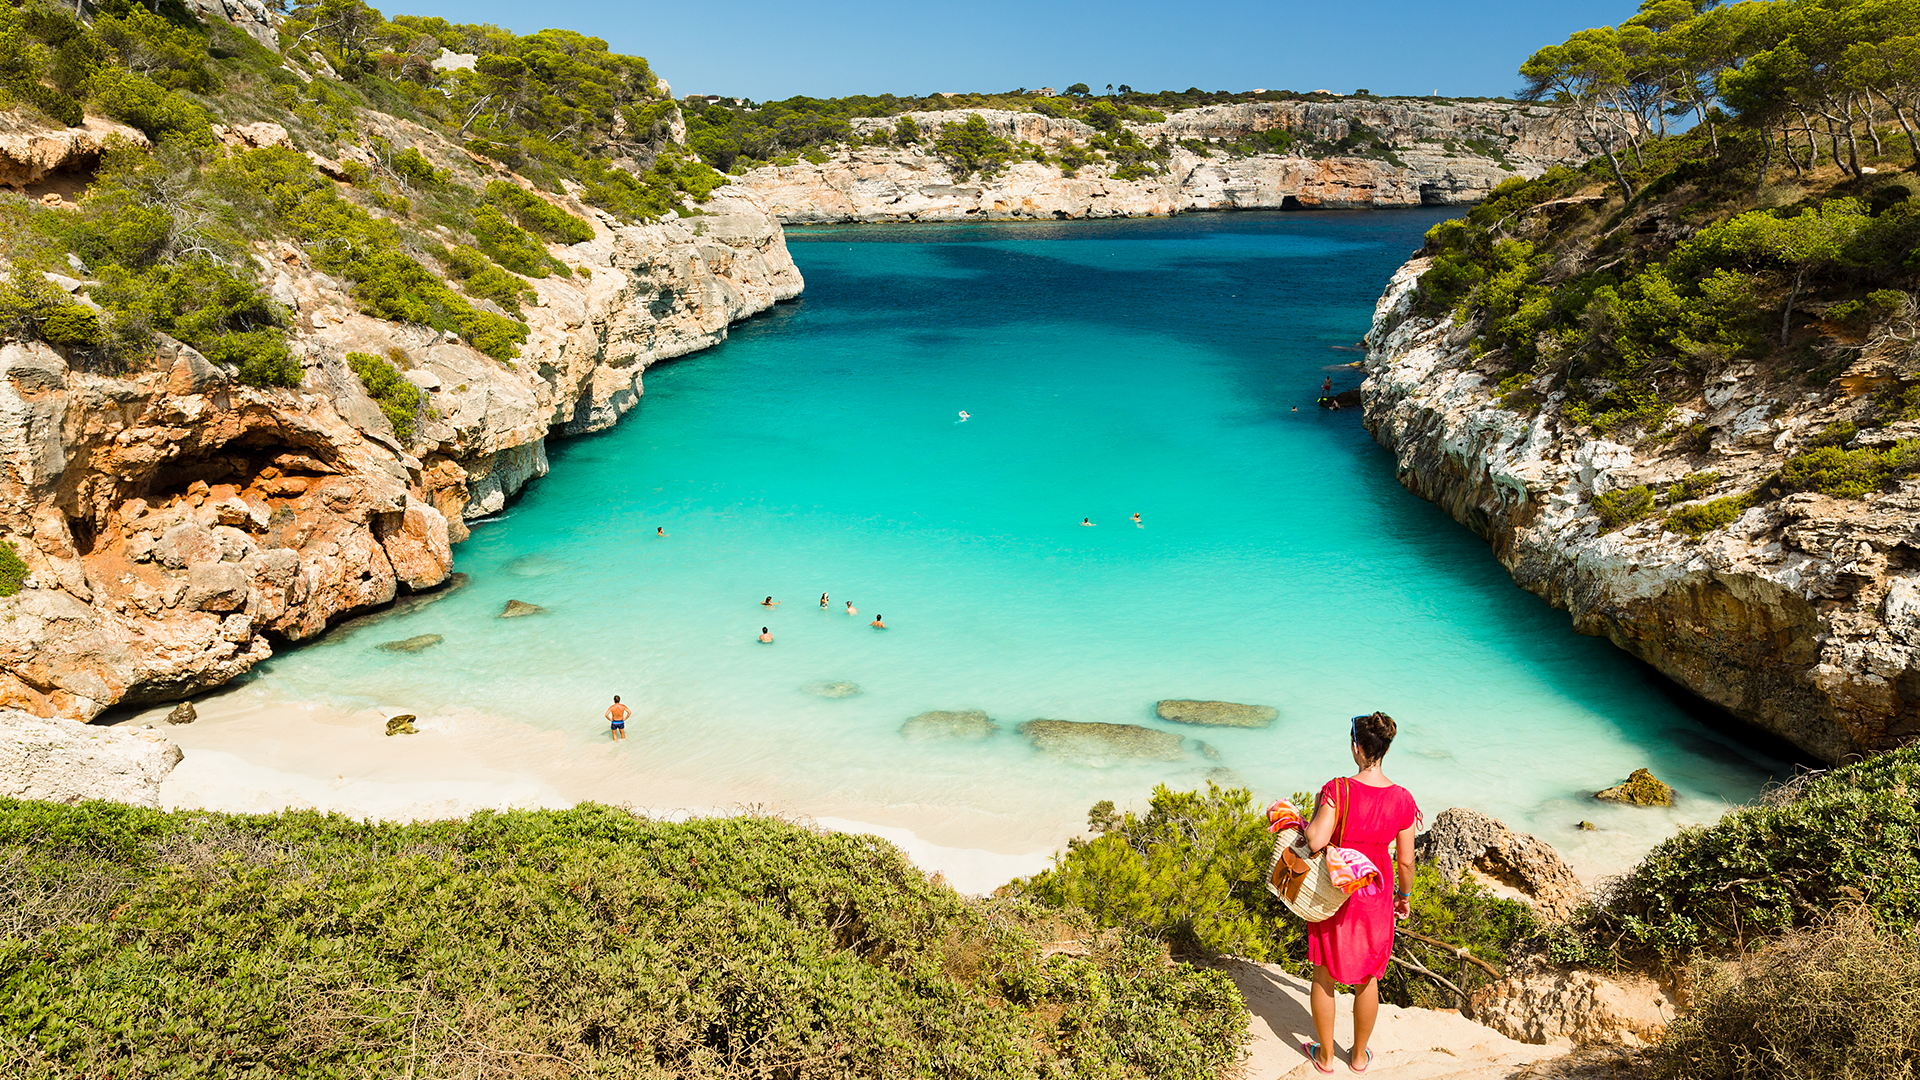 A beach with crystal clear waters, and the typical Mediterranean flora